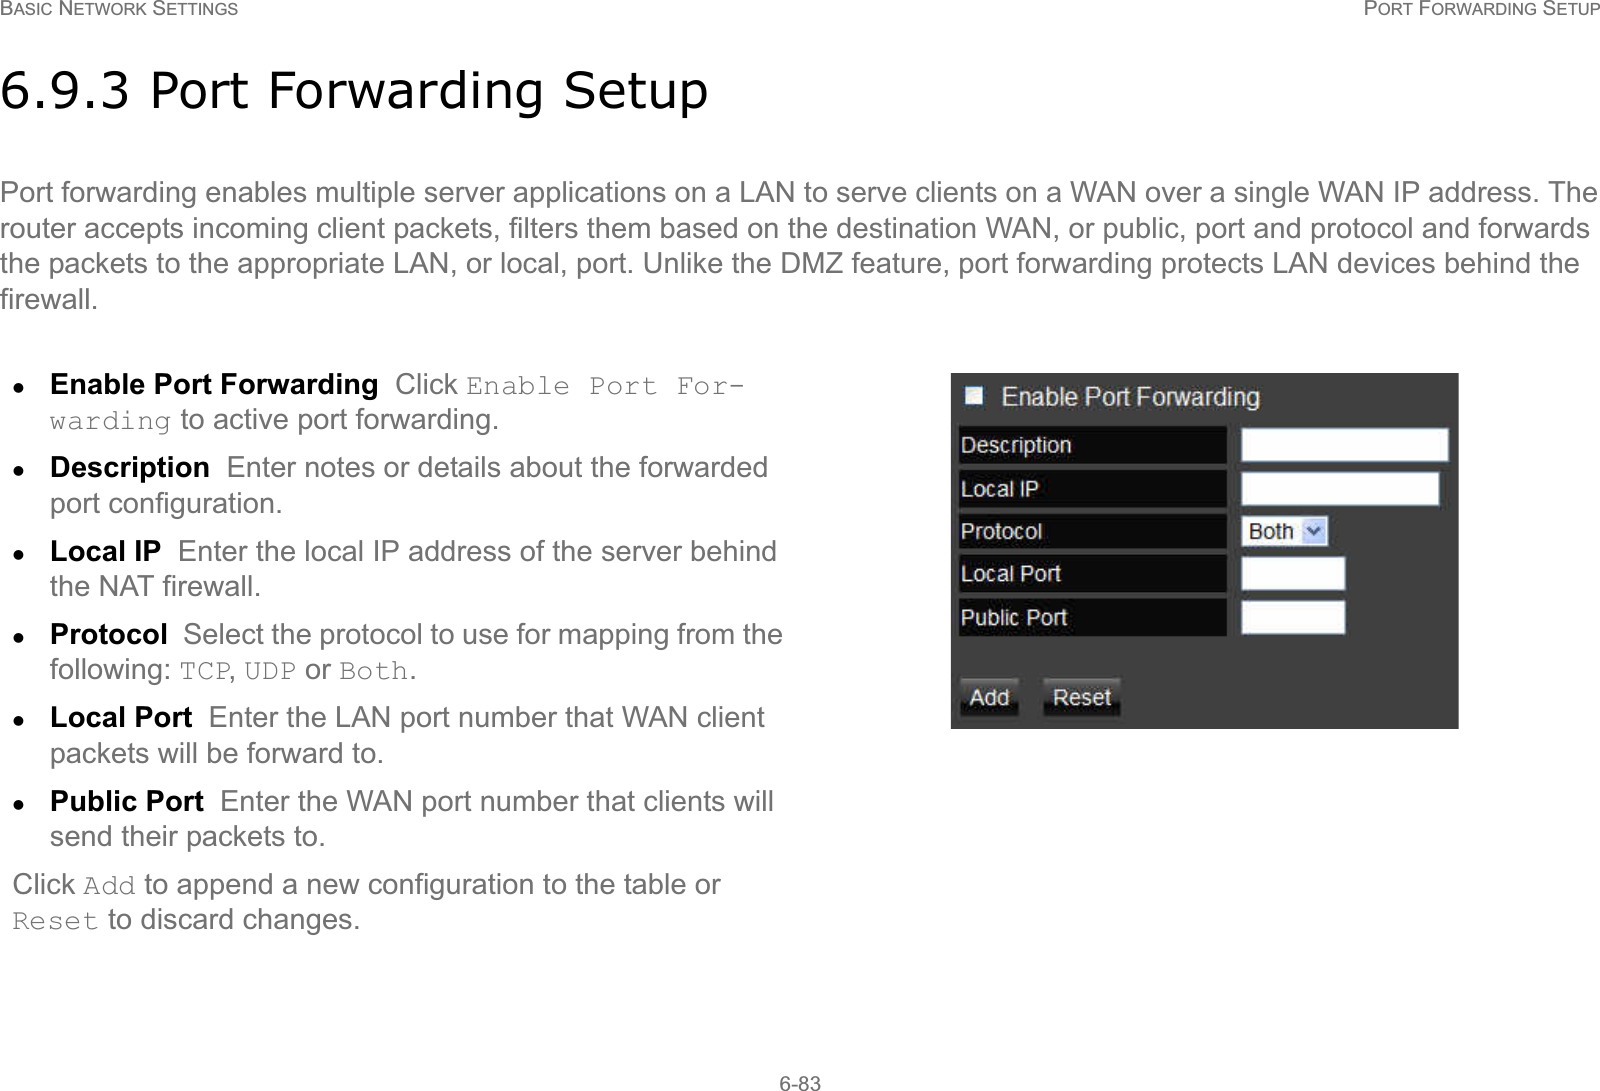 BASIC NETWORK SETTINGS PORT FORWARDING SETUP6-836.9.3 Port Forwarding SetupPort forwarding enables multiple server applications on a LAN to serve clients on a WAN over a single WAN IP address. The router accepts incoming client packets, filters them based on the destination WAN, or public, port and protocol and forwards the packets to the appropriate LAN, or local, port. Unlike the DMZ feature, port forwarding protects LAN devices behind the firewall.zEnable Port Forwarding  Click Enable Port For-warding to active port forwarding.zDescription  Enter notes or details about the forwarded port configuration.zLocal IP  Enter the local IP address of the server behind the NAT firewall.zProtocol  Select the protocol to use for mapping from the following: TCP, UDP or Both.zLocal Port  Enter the LAN port number that WAN client packets will be forward to.zPublic Port  Enter the WAN port number that clients will send their packets to.Click Add to append a new configuration to the table or Reset to discard changes.